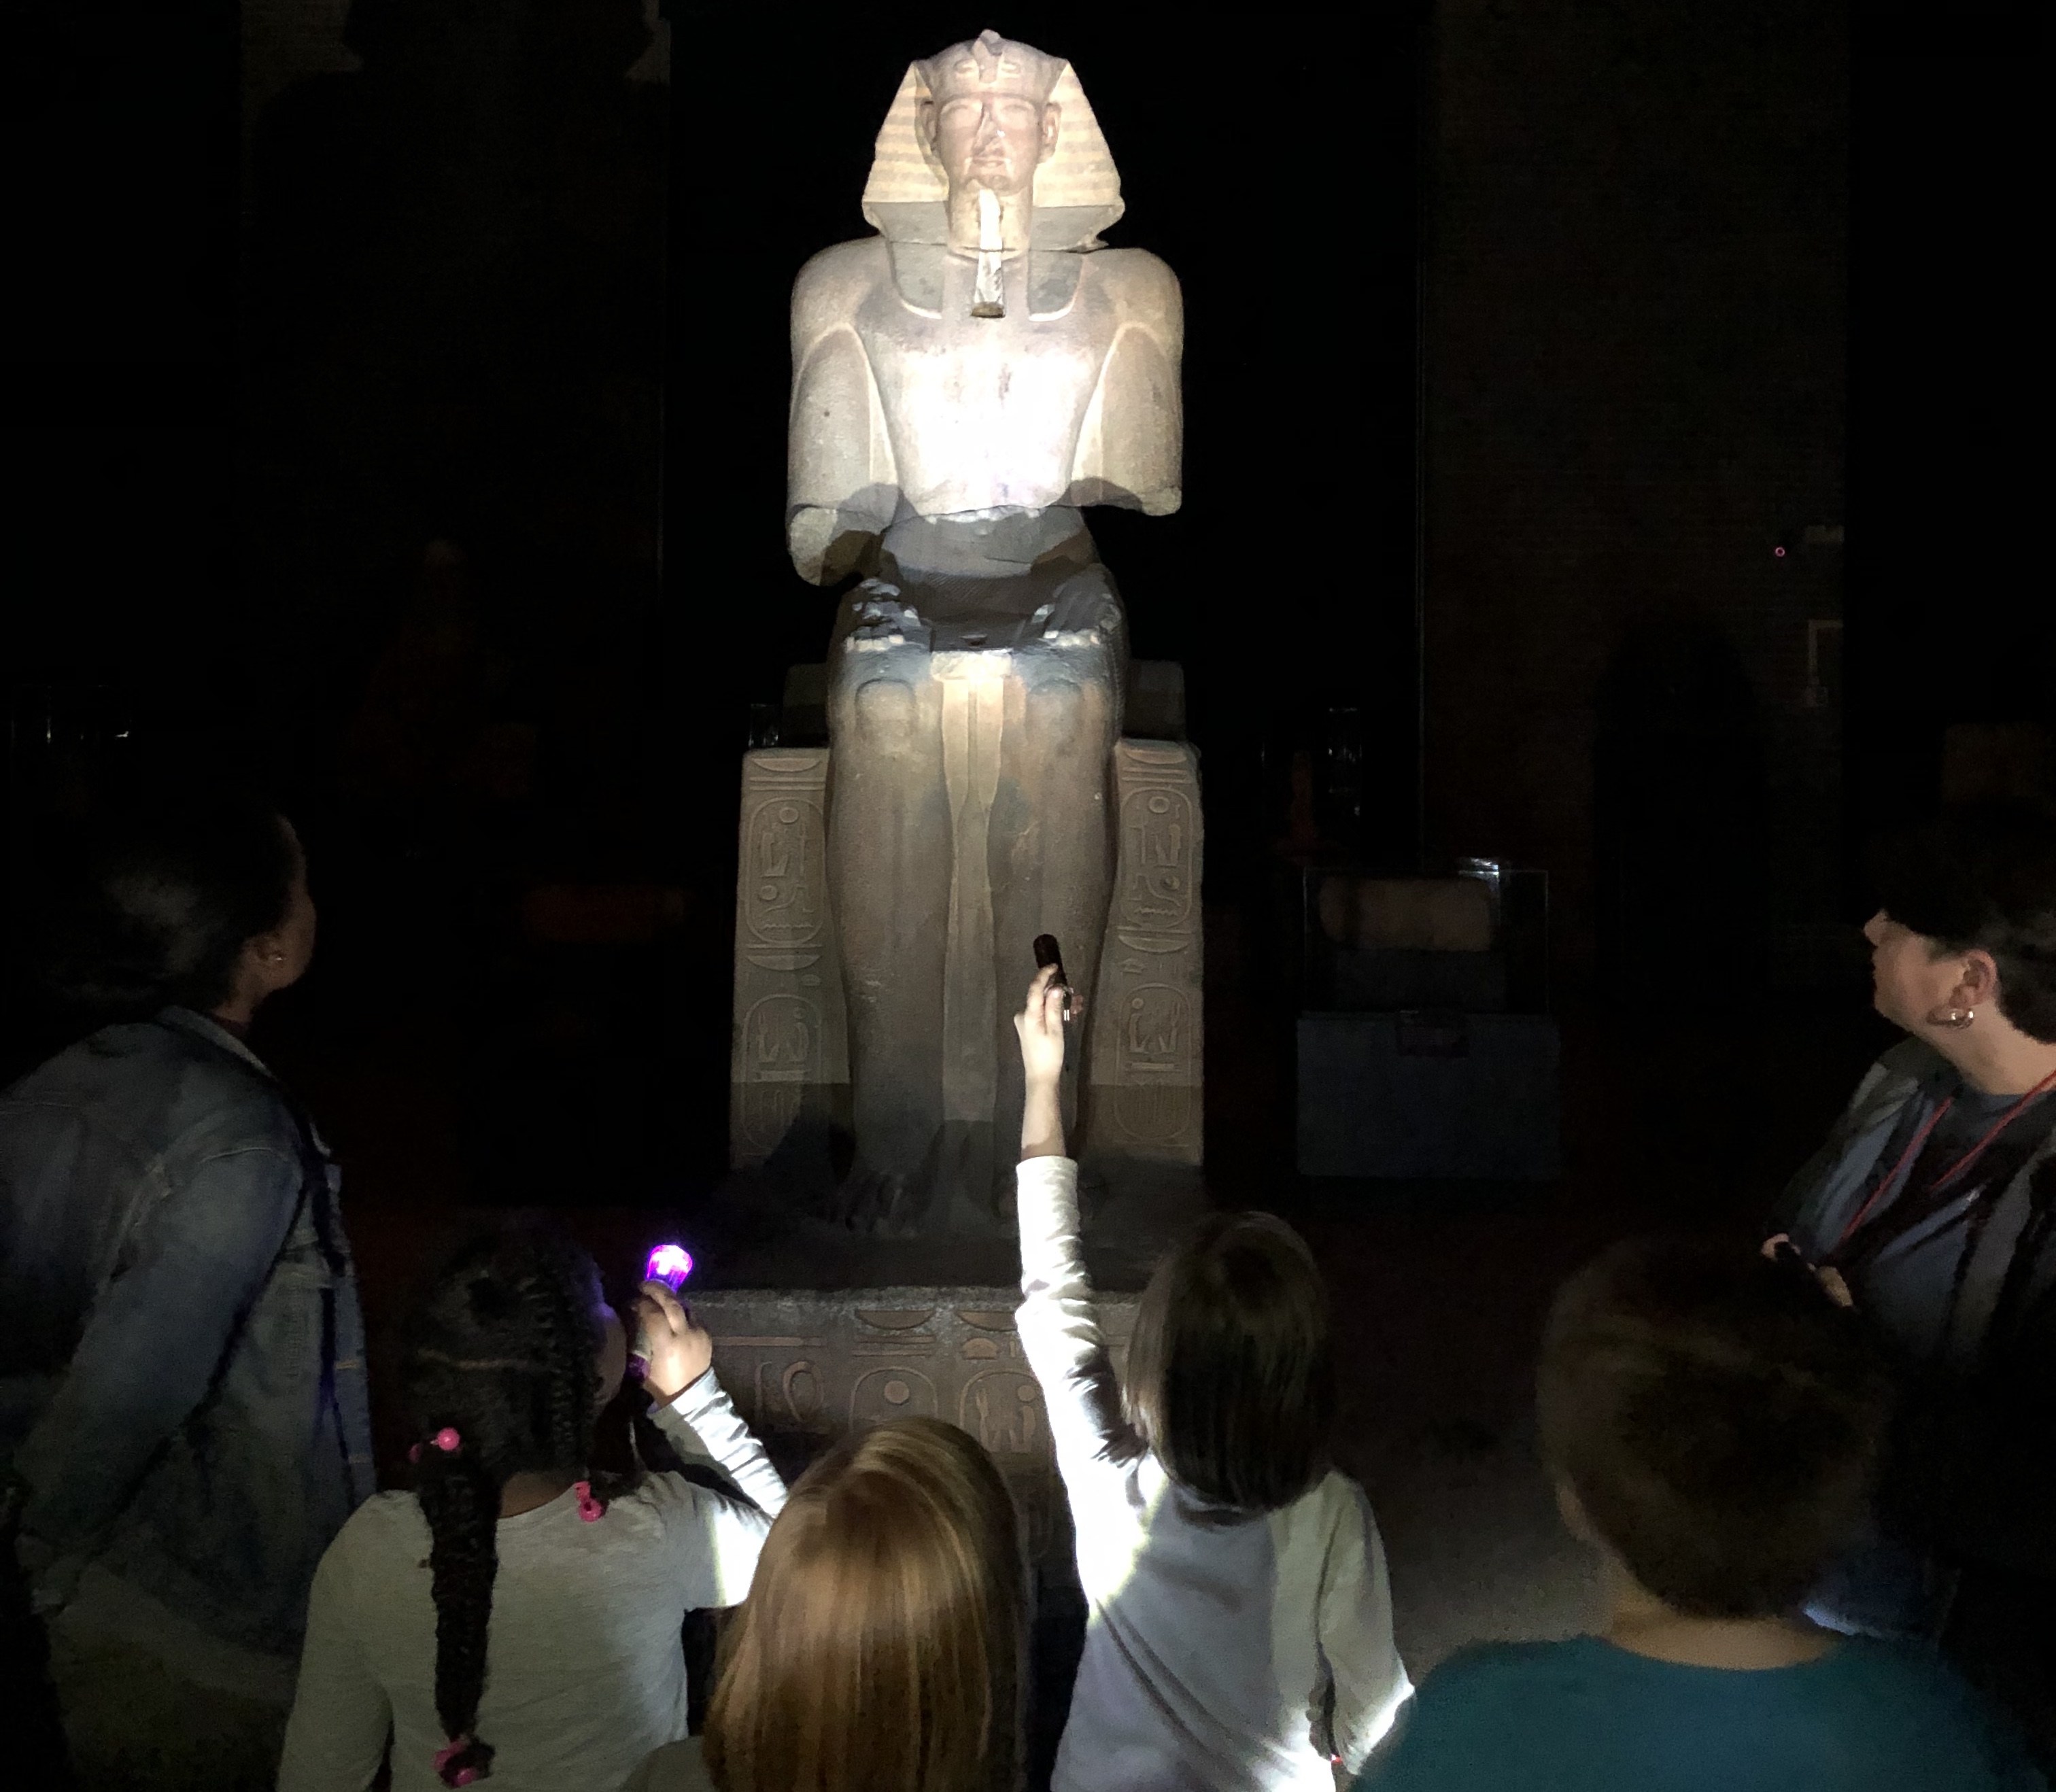 Kids with statue and flashlights